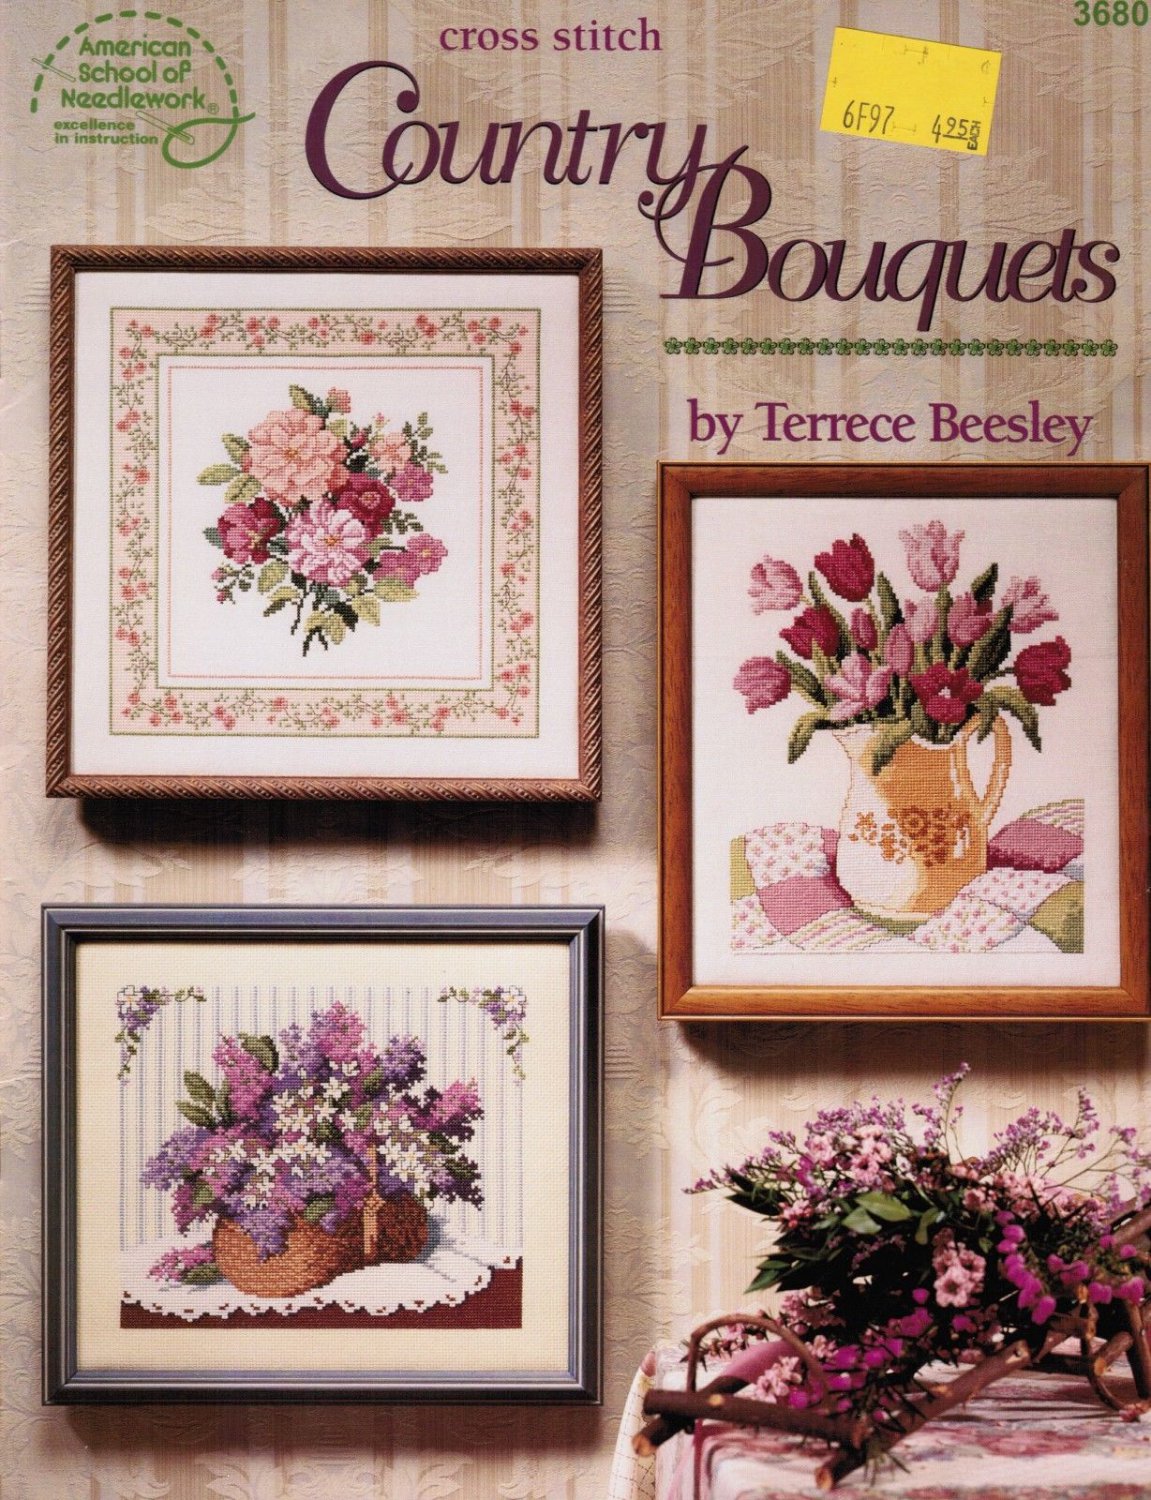 Country Bouquets by Terrece Beesley American School of Needlework 3680